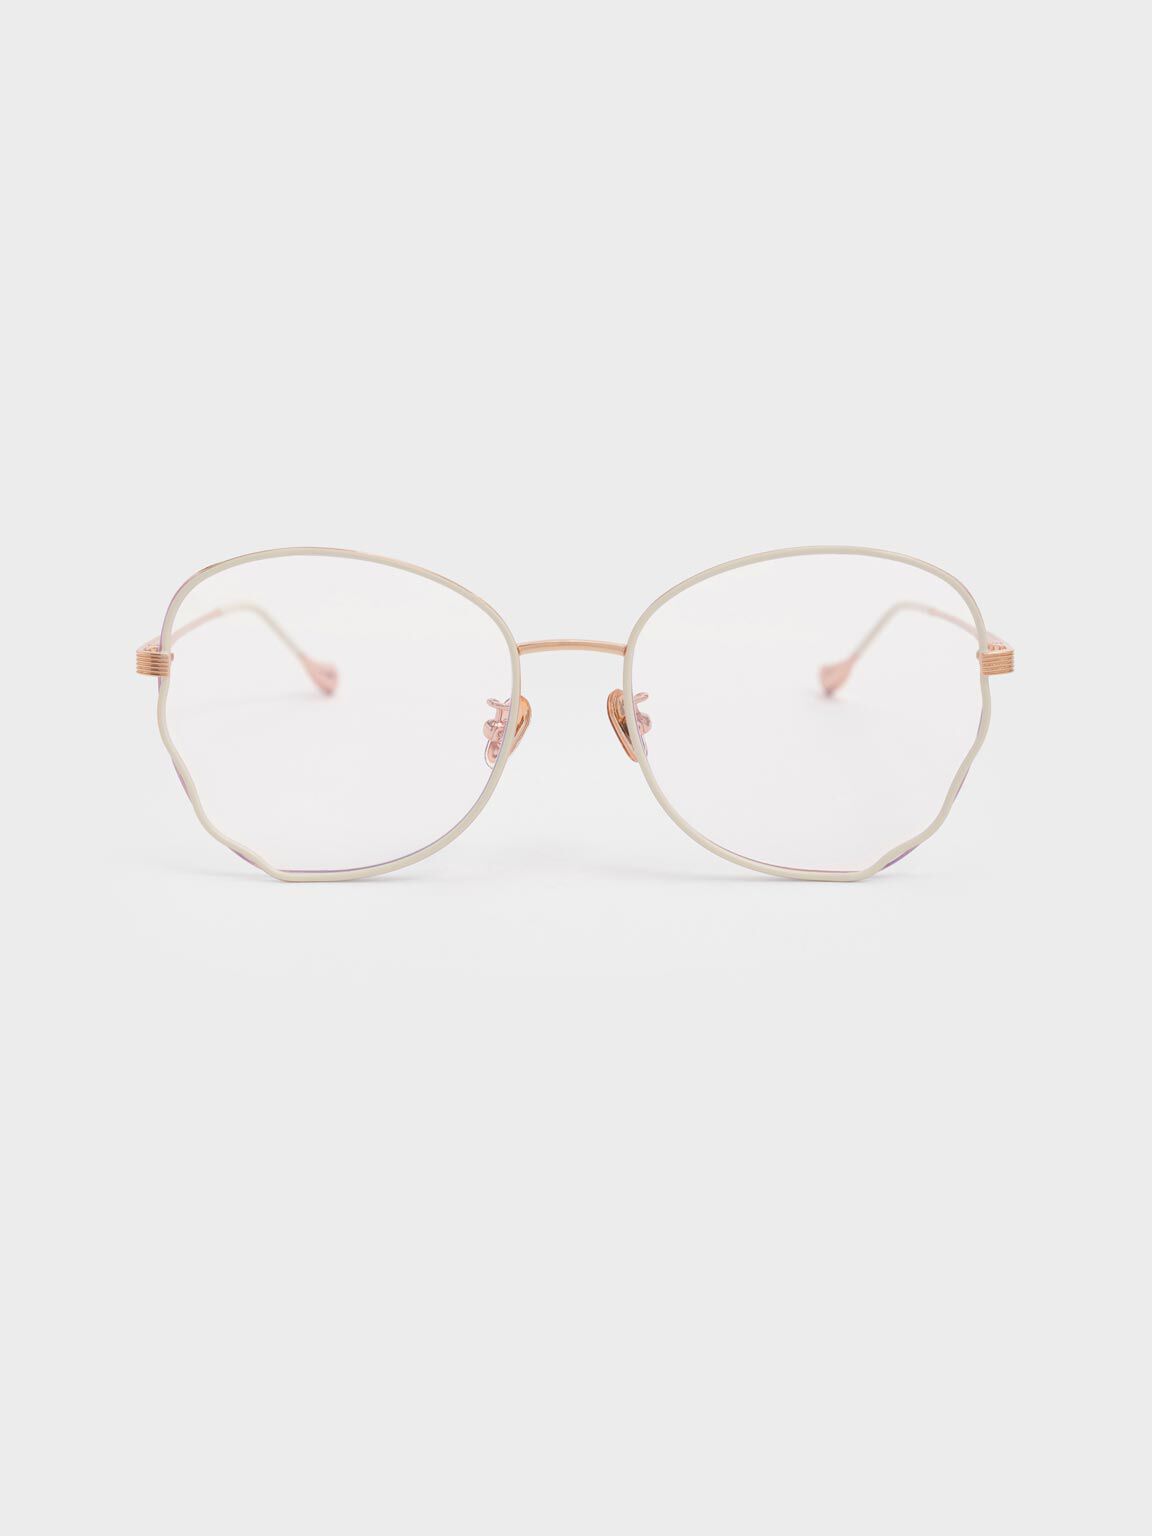 Cut-Out Frame Blue-Light Butterfly Sunglasses, Cream, hi-res